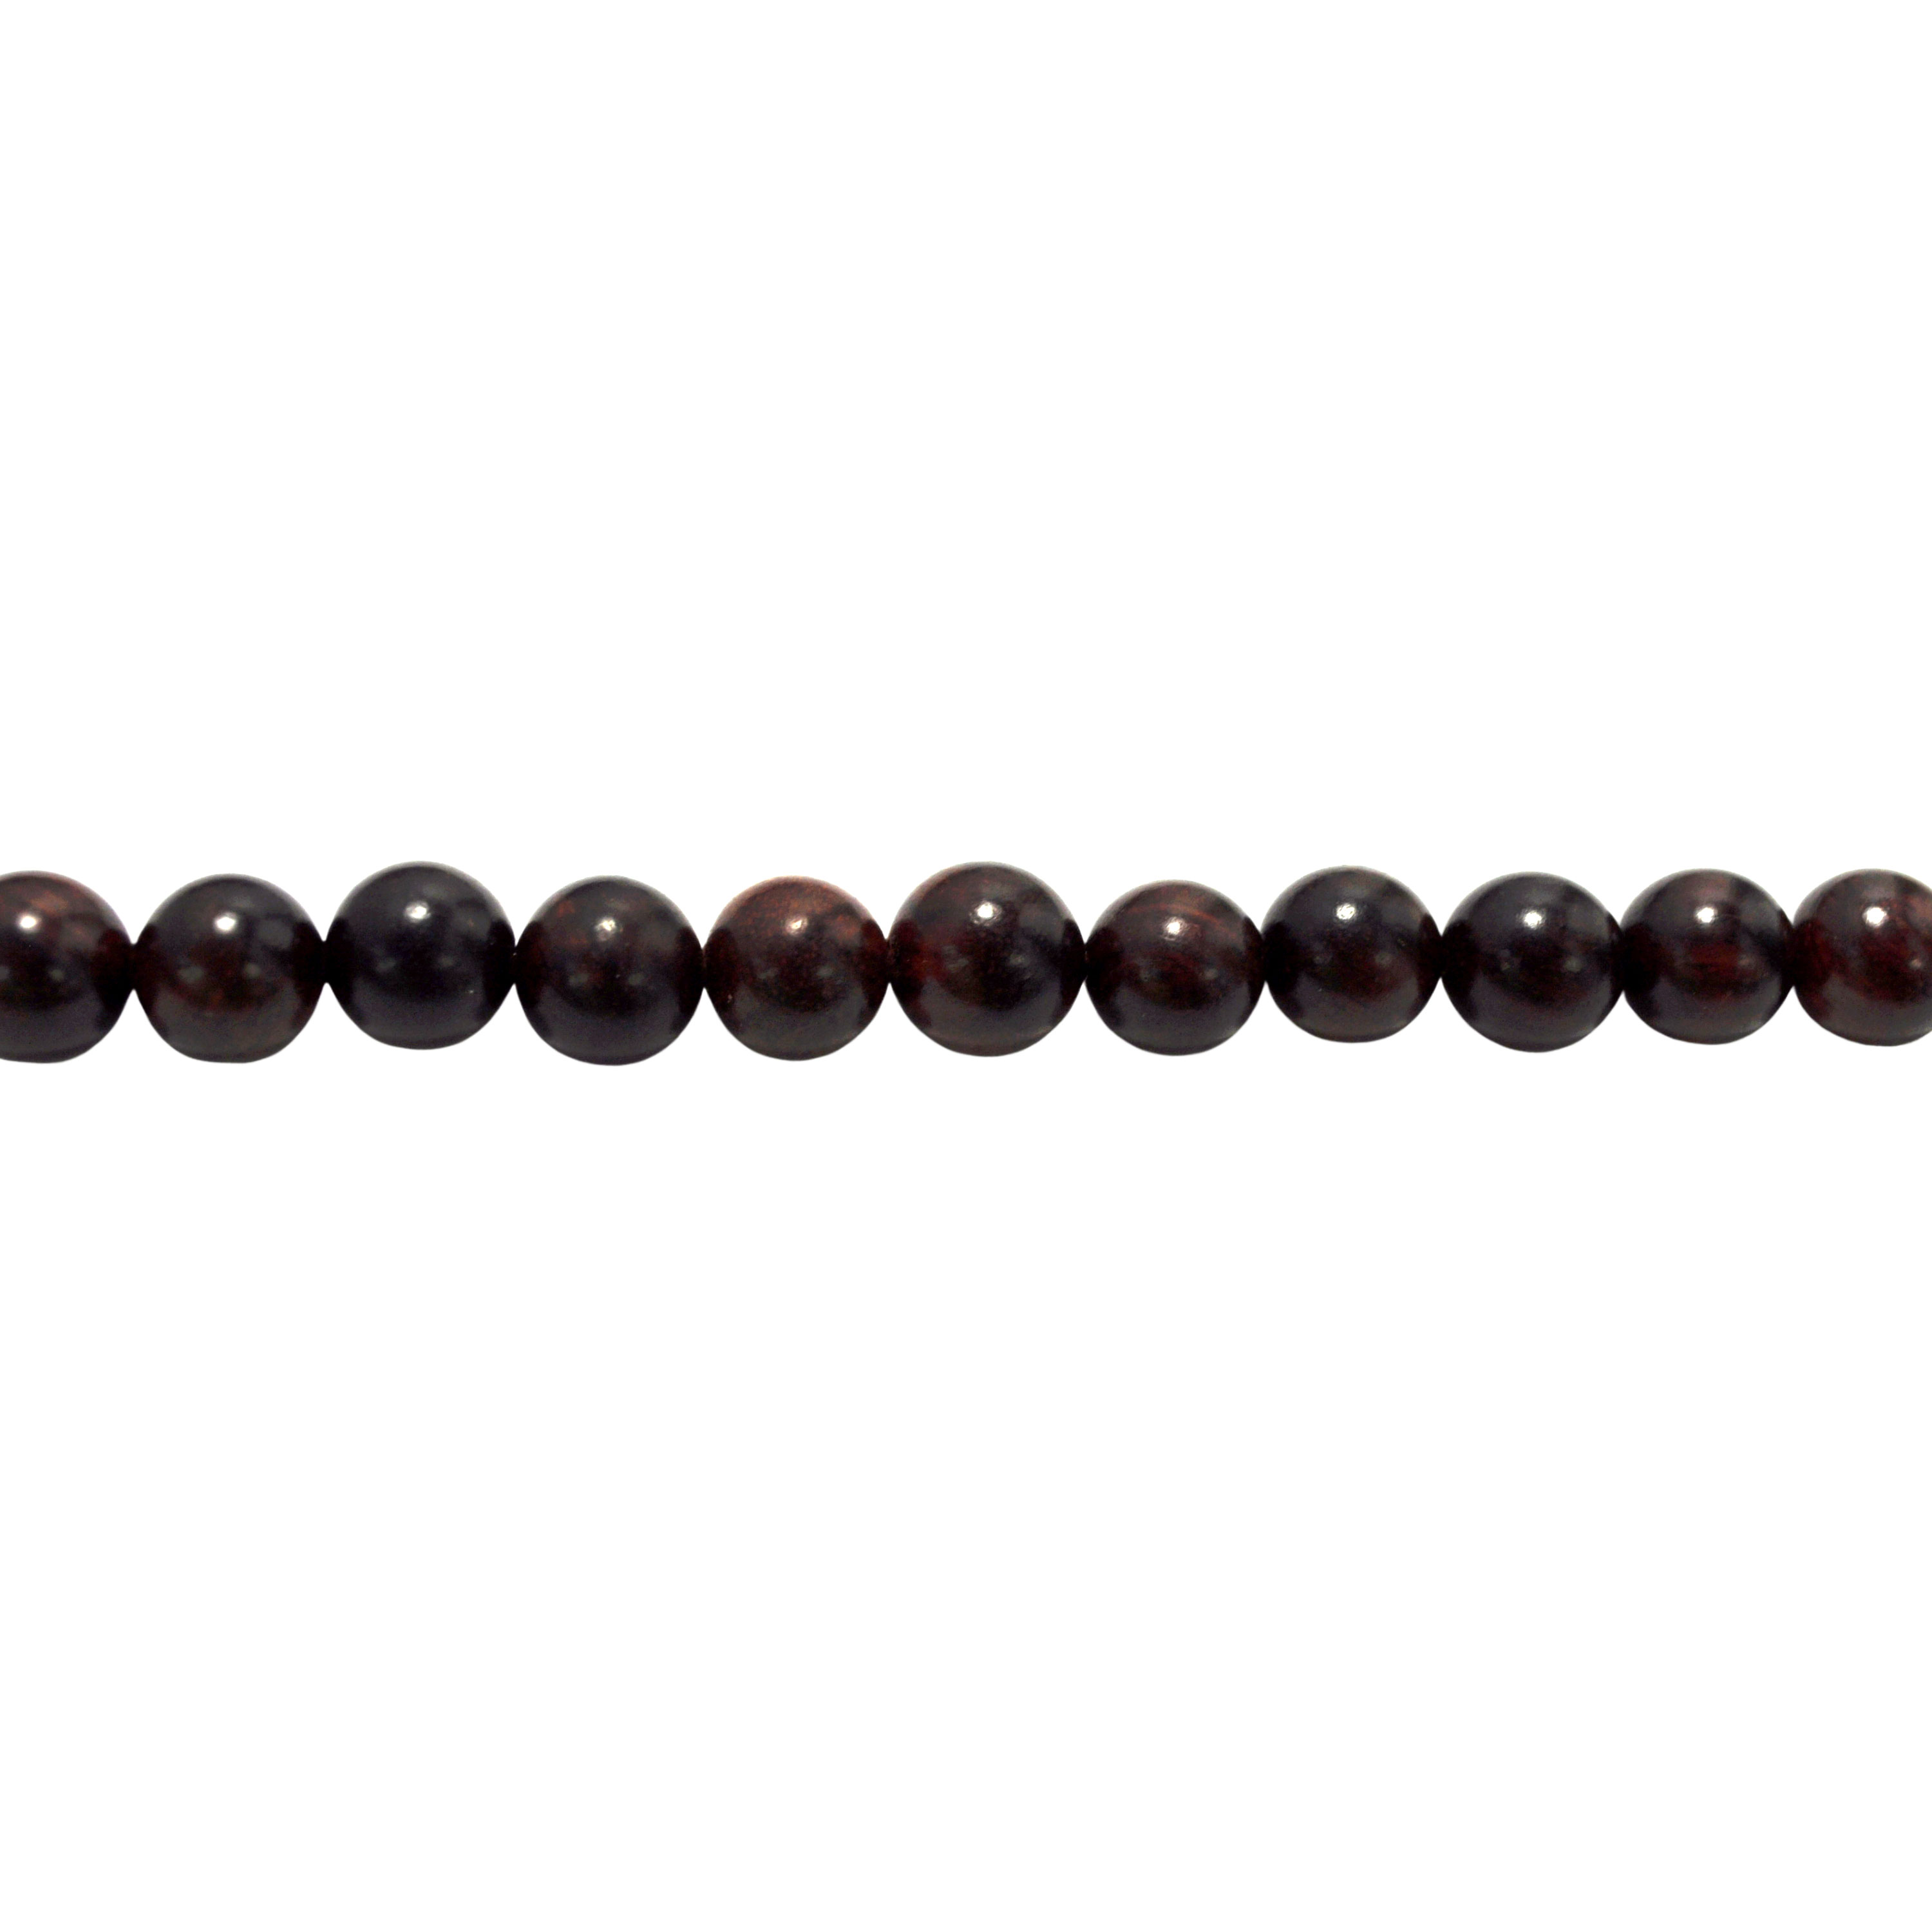 12mm Red Wood Beads - 32" Strand